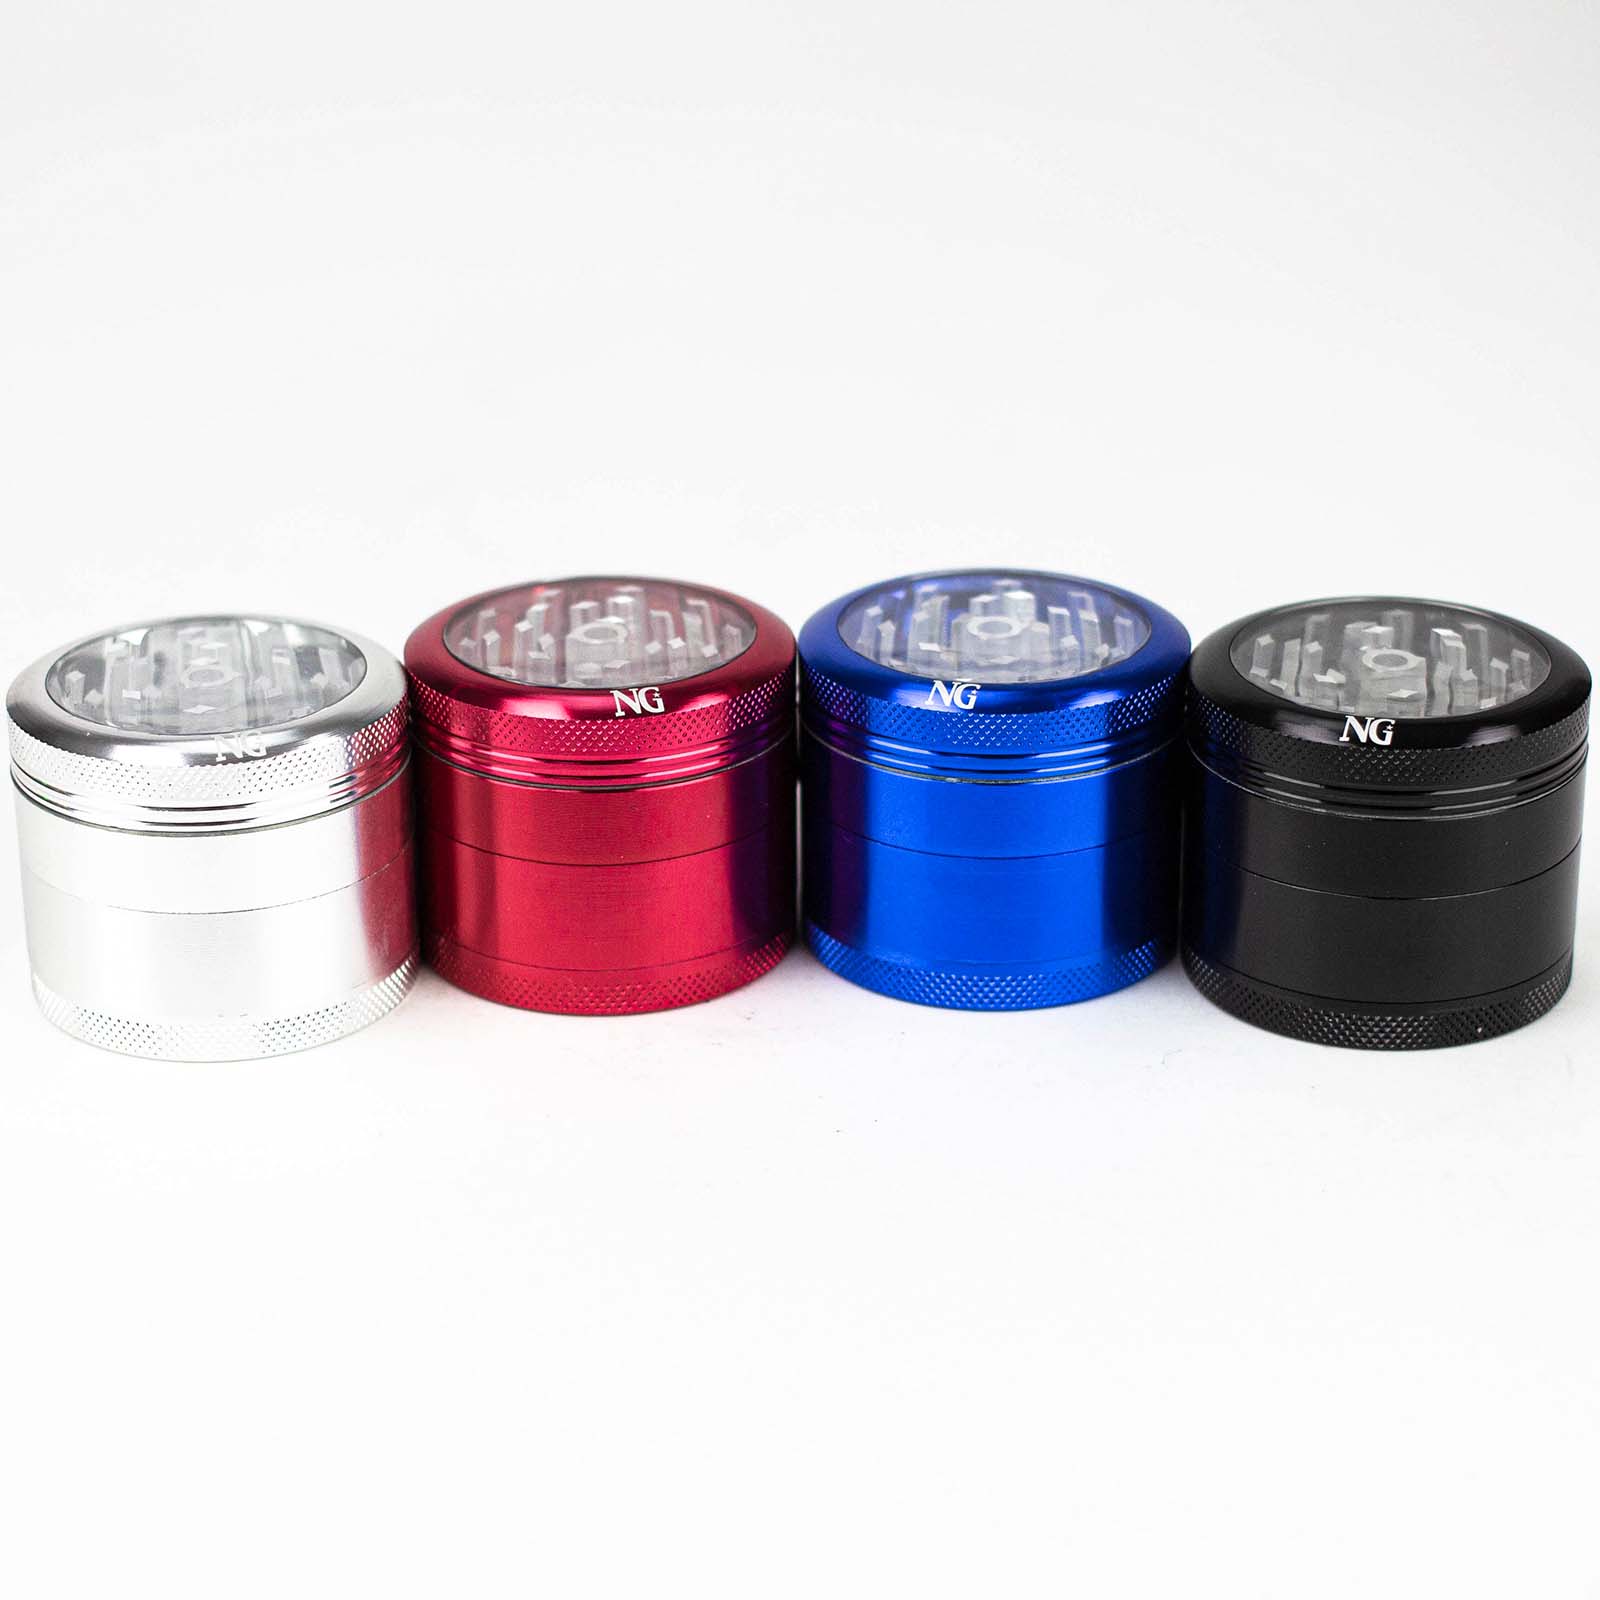 NG 4 Piece Aluminum Grinder with Window PILOTDIARY